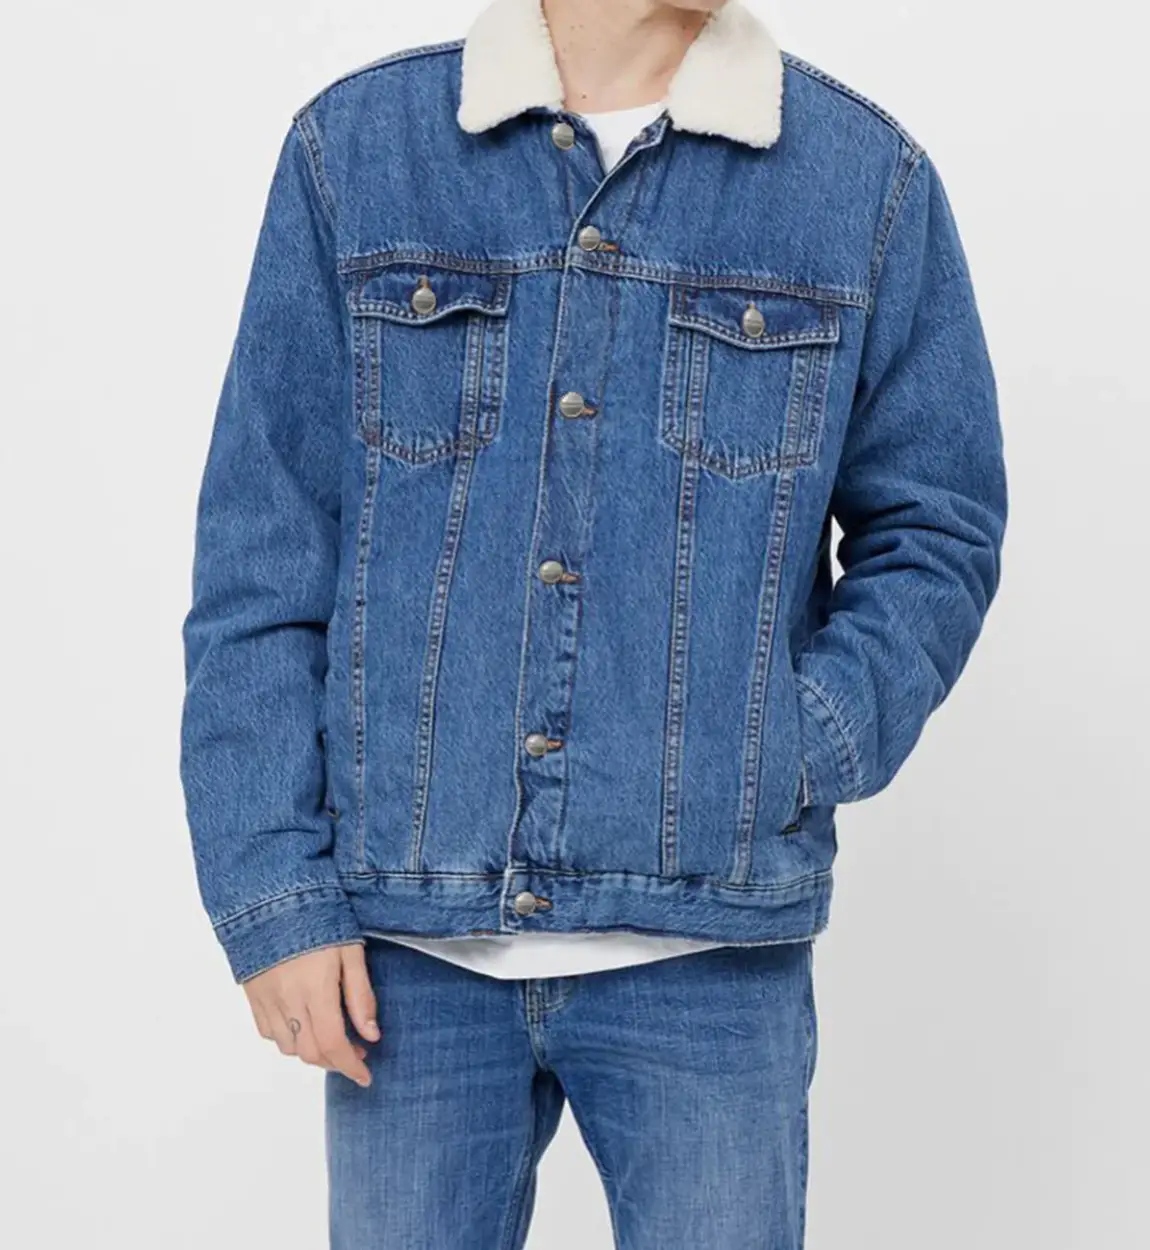 Blue Denim Jacket with Sherpa by Tendon Sports